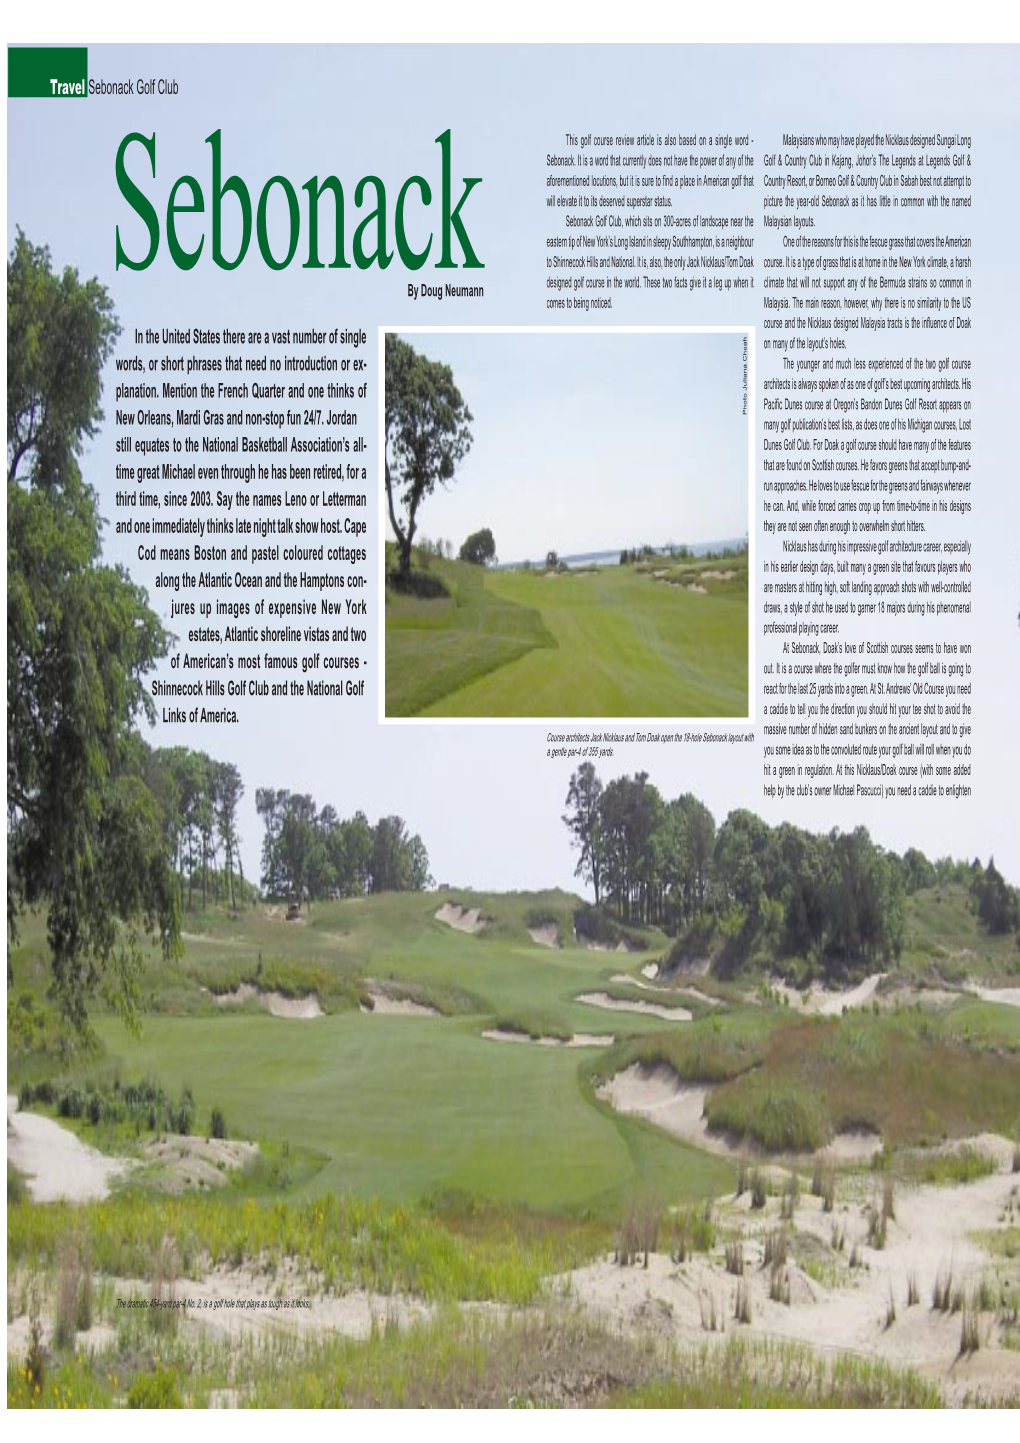 Sebonack This Golf Course Review Article Is Also Based on a Single Word